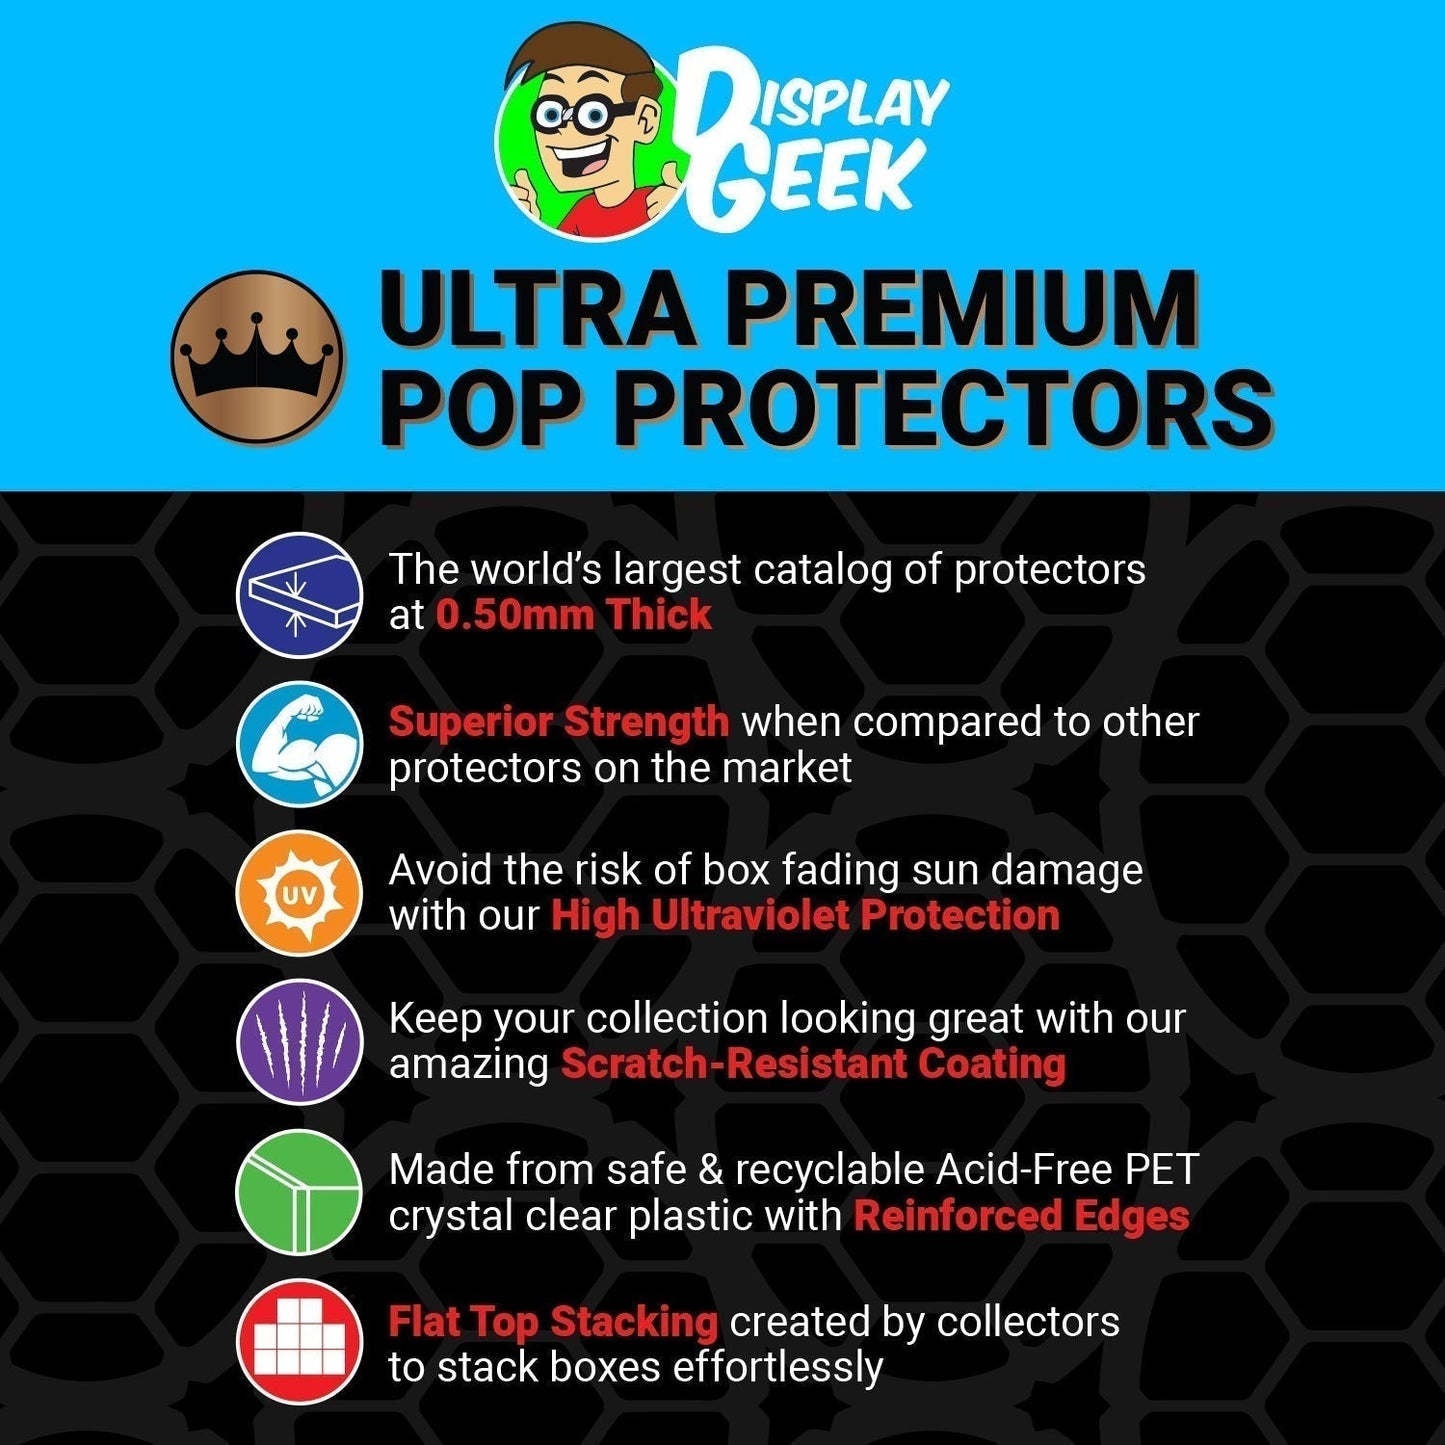 Pop Protector for Pop & Tee Kang Glow in the Dark #1305 Funko Box - PPG Pop Protector Guide Search Created by Display Geek